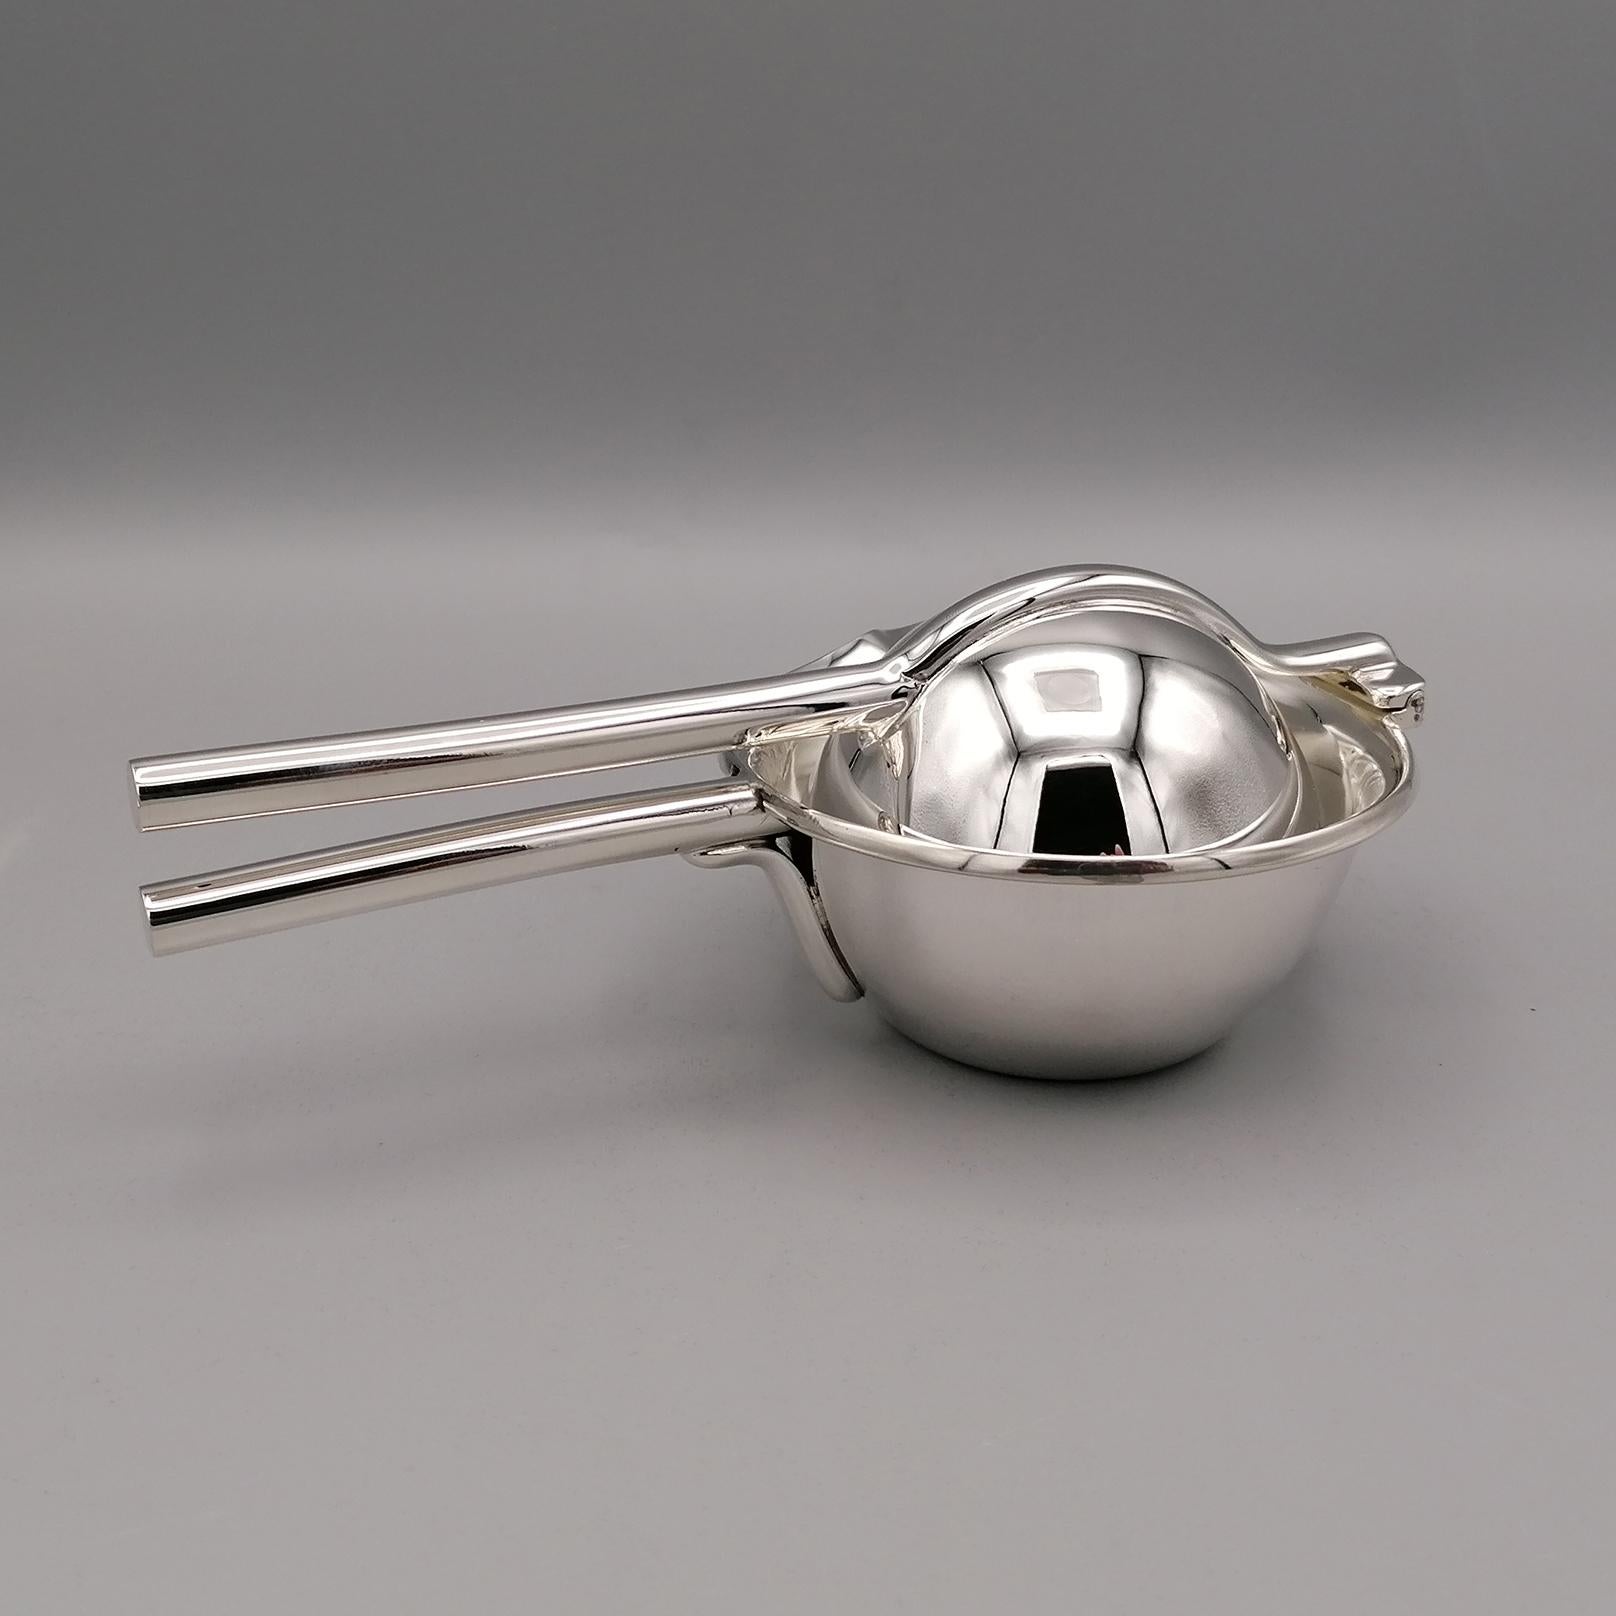 Other 20th Century Italia Sterling Silver Juicer For Sale